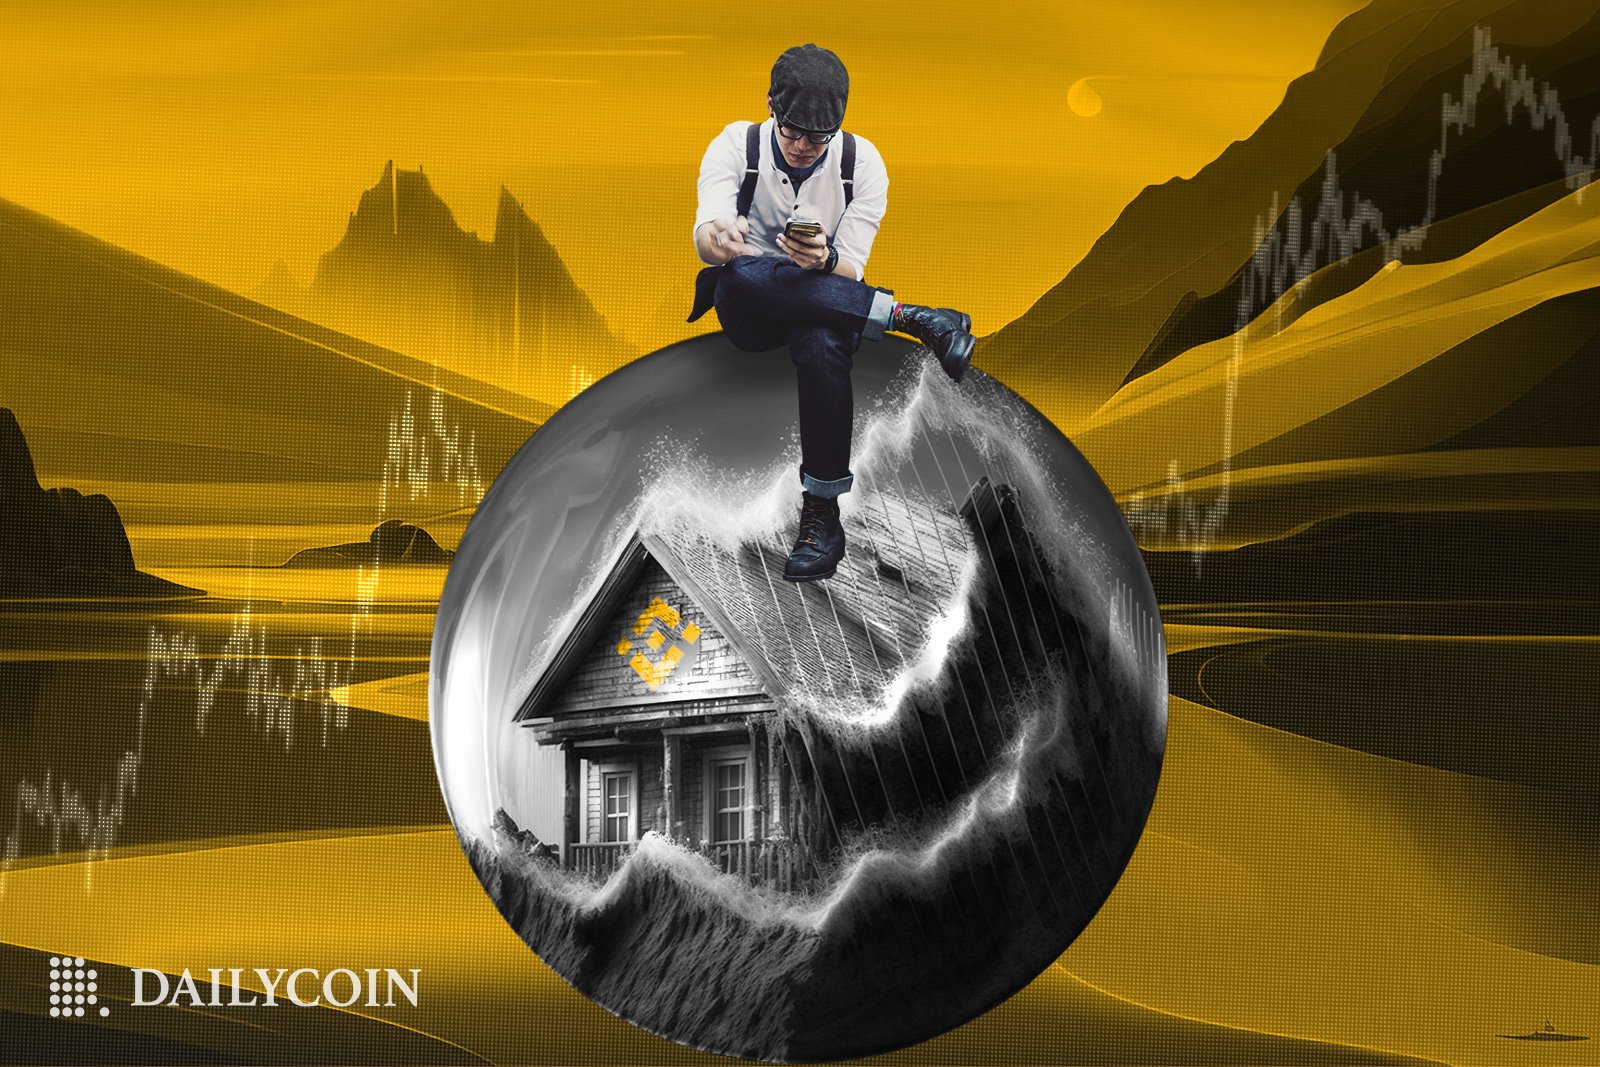 A man sitting cross legged patiently waiting, on top of a house with the Binance logo on it getting battered by waves